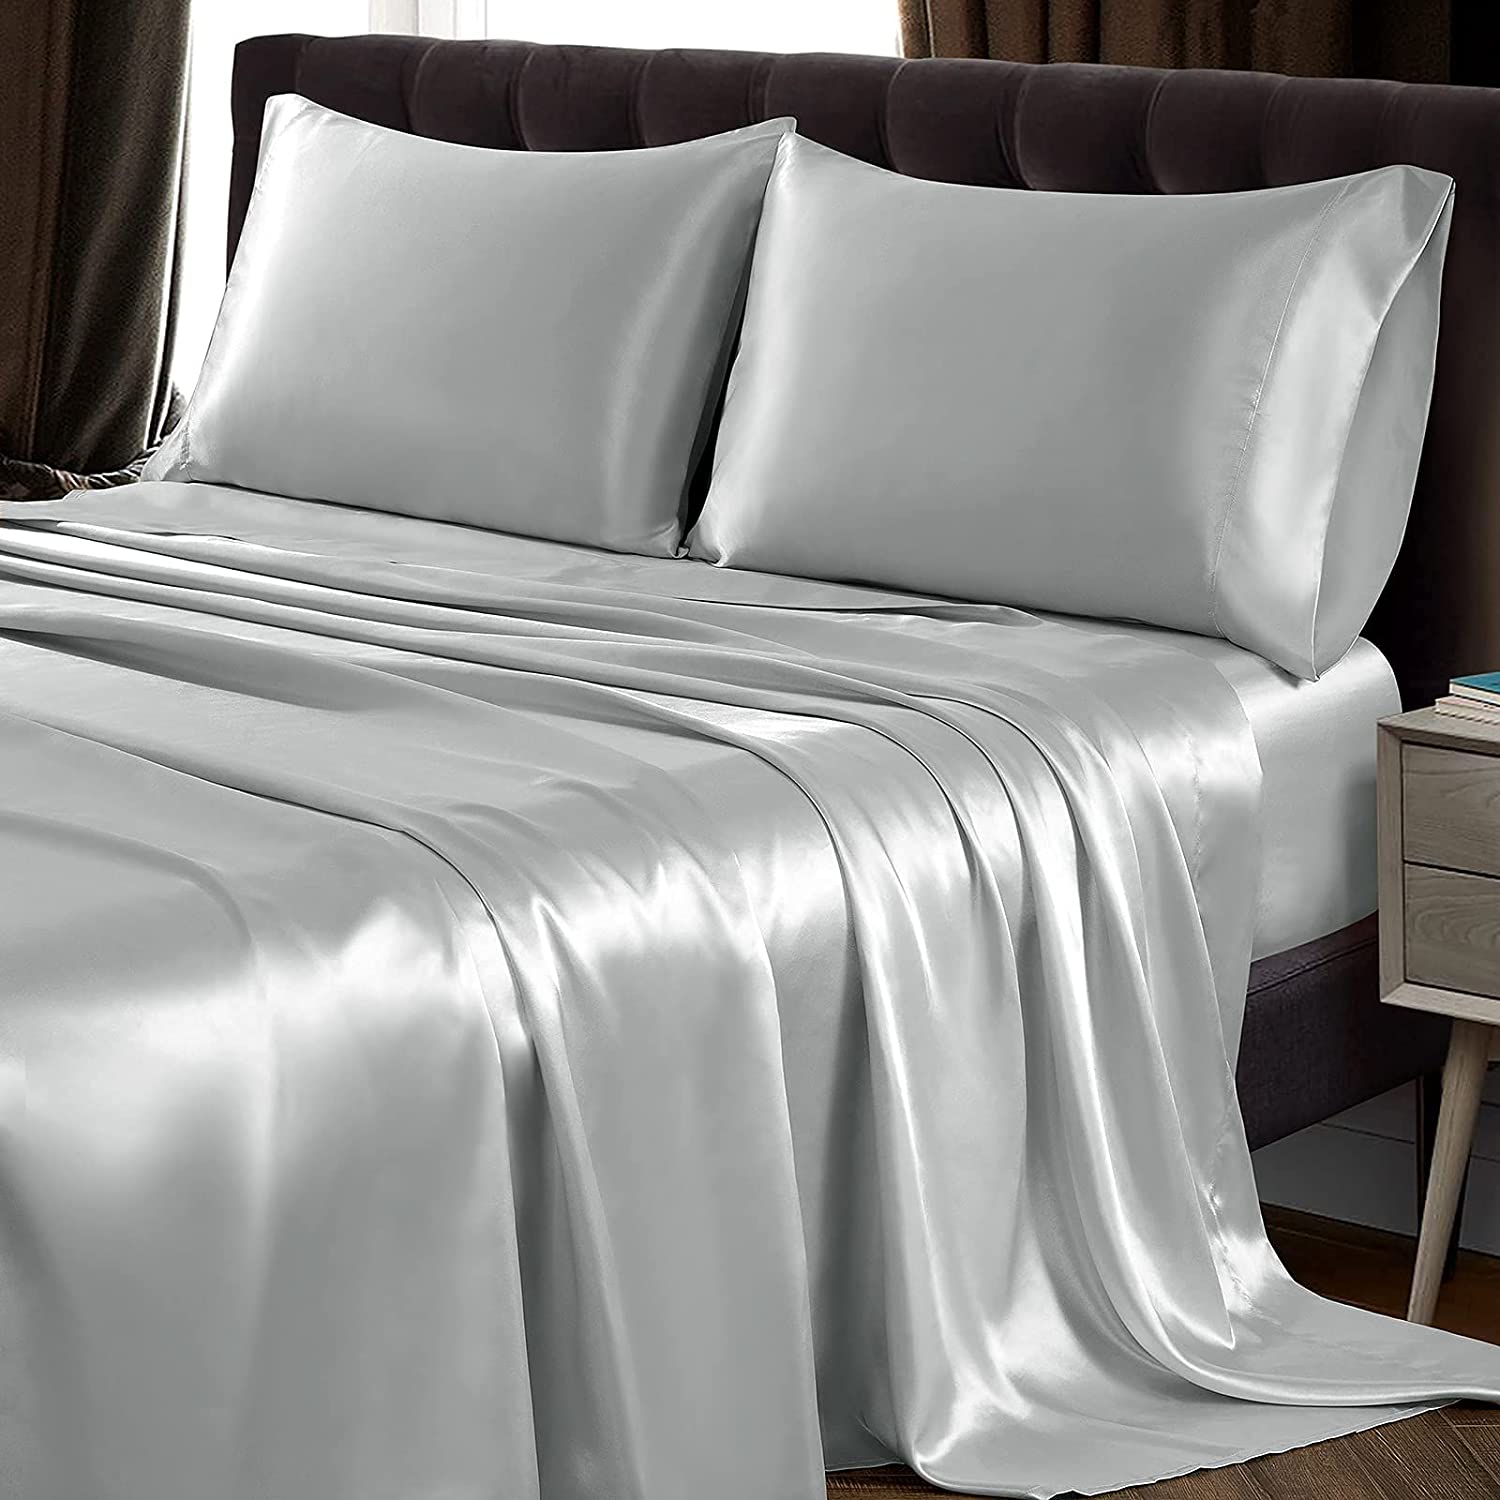  SiinvdaBZX 4Pcs Satin Sheet Set Queen Size Ultra Silky